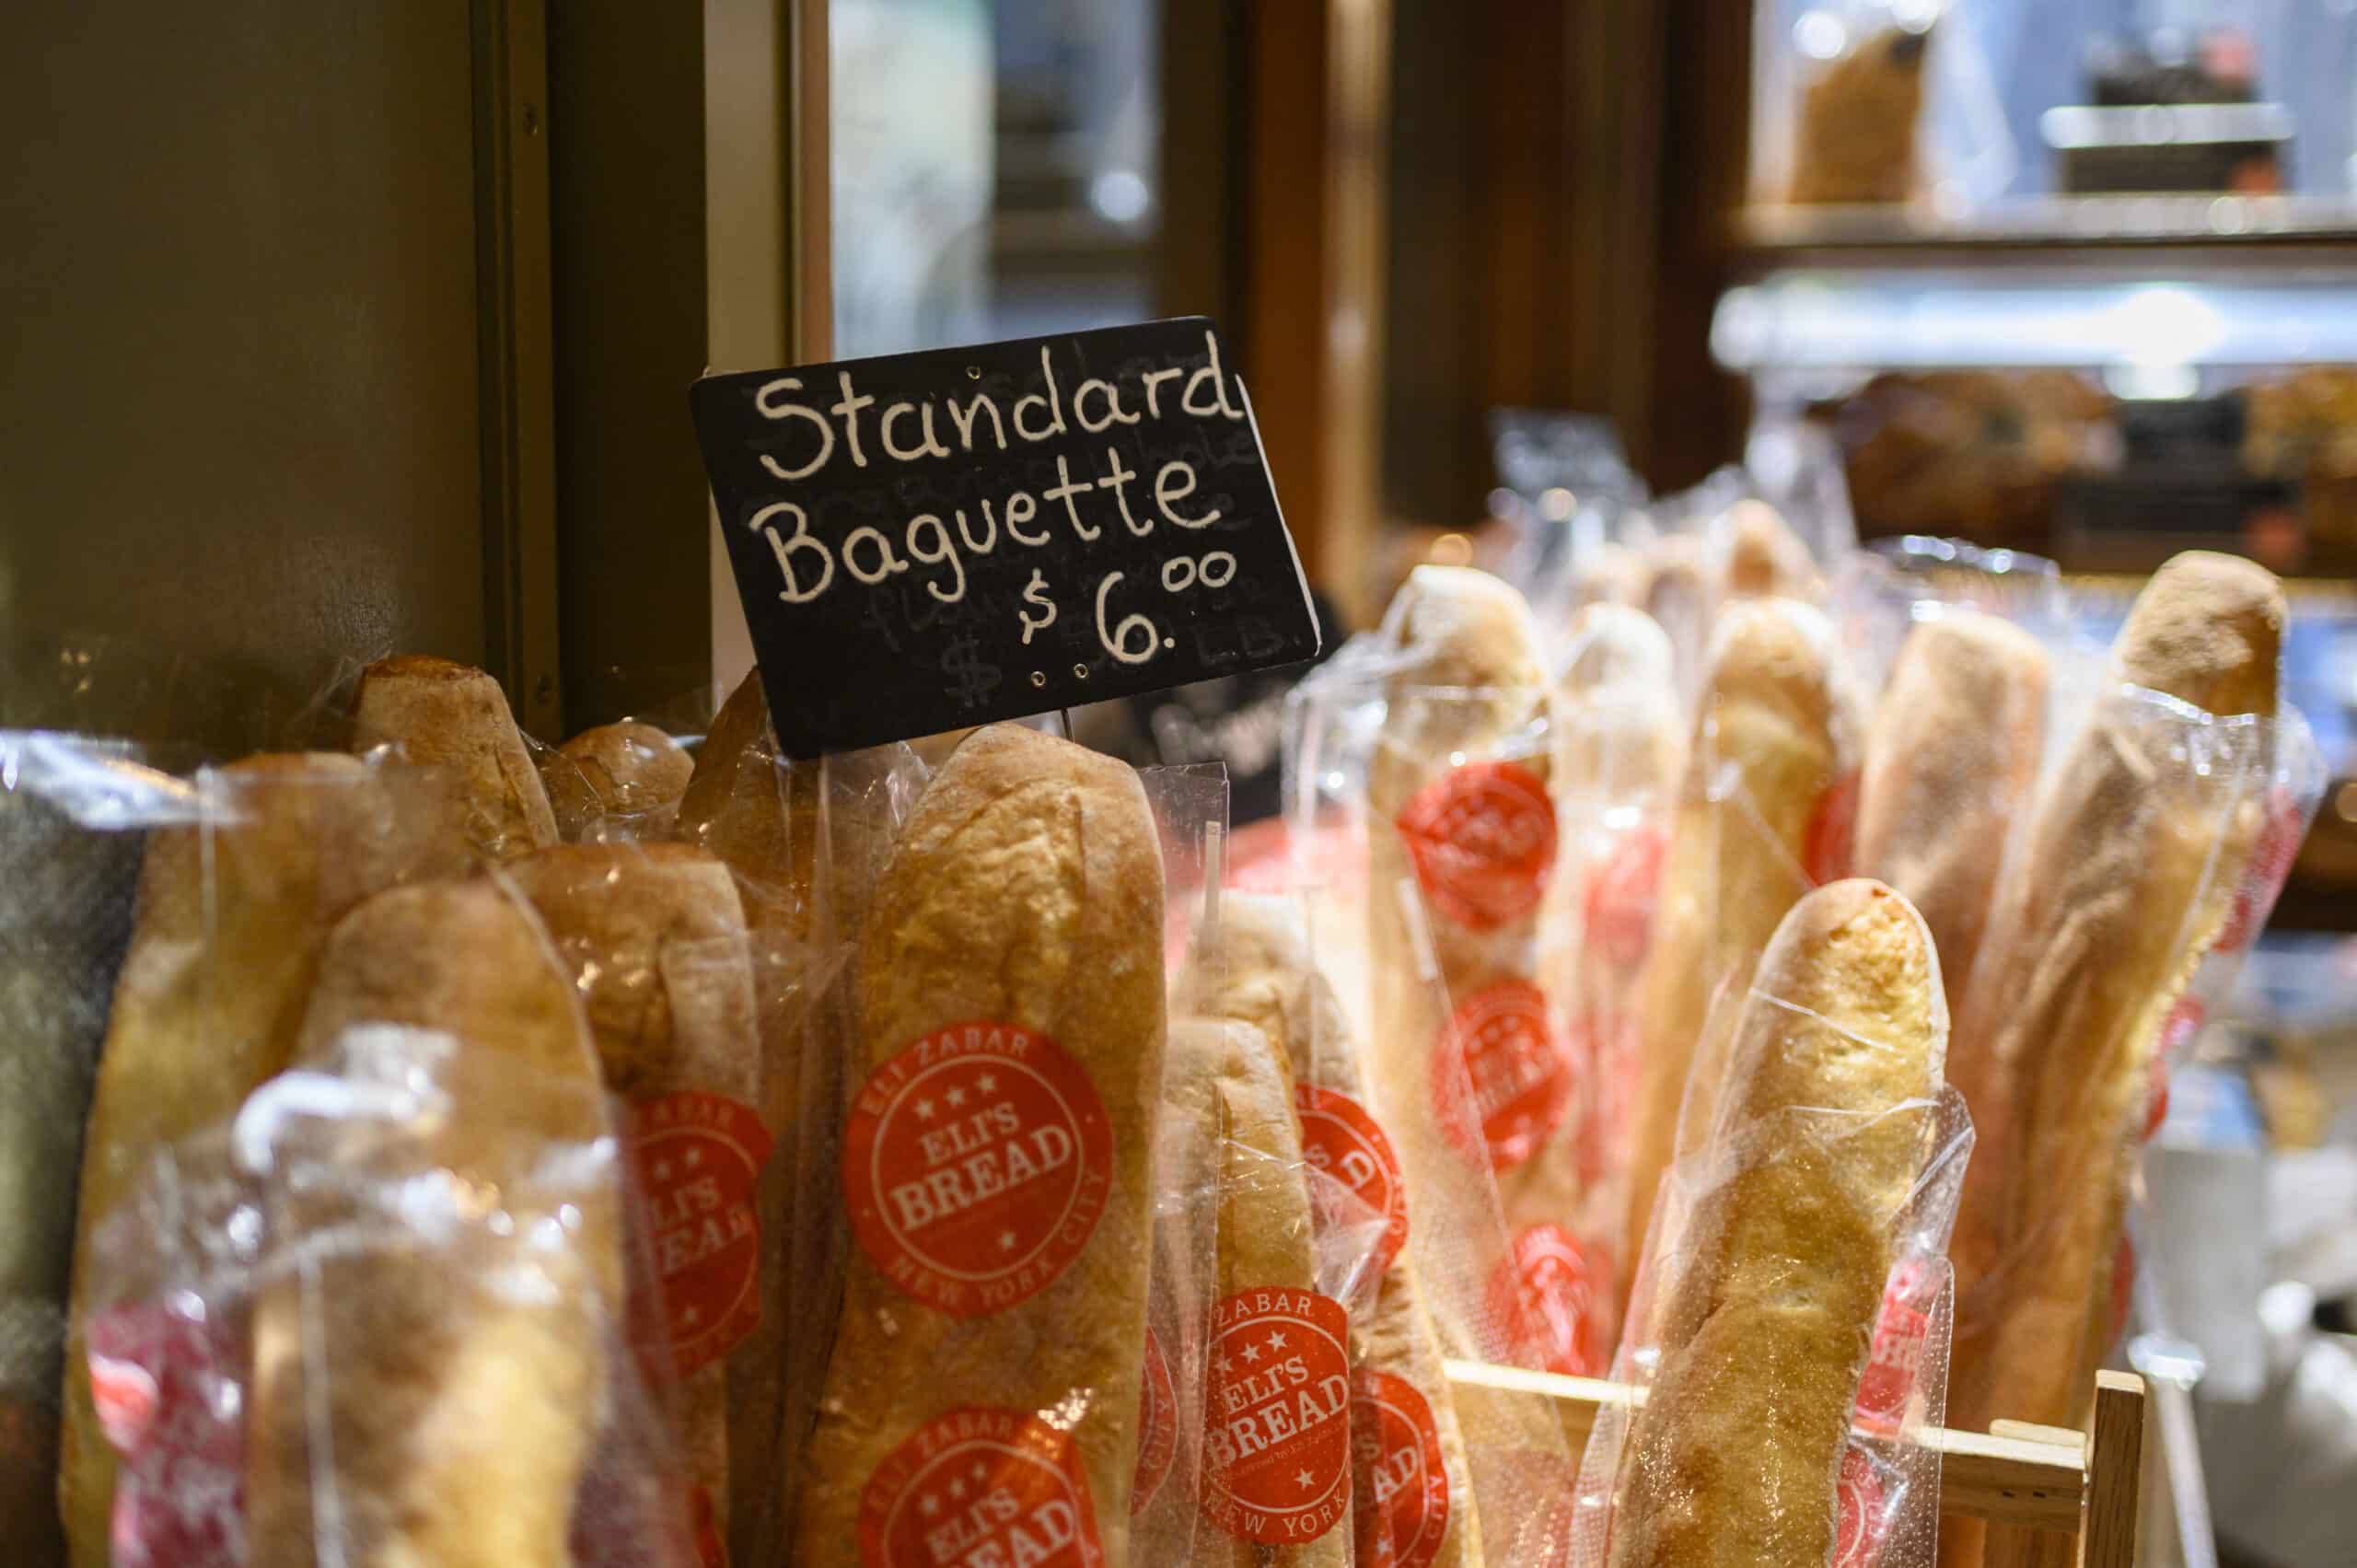 Baguettes are sold at a supermarket on July 13, 2022 ,in New York City. - US consumer price inflation surged 9.1 percent over the past 12 months to June, the fastest increase since November 1981, according to government data released on July 13. Driven by record-high gasoline prices, the consumer price index jumped 1.3 percent in June, the Labor Department reported. (Photo by ANGELA WEISS / AFP) (Photo by ANGELA WEISS/AFP via Getty Images)